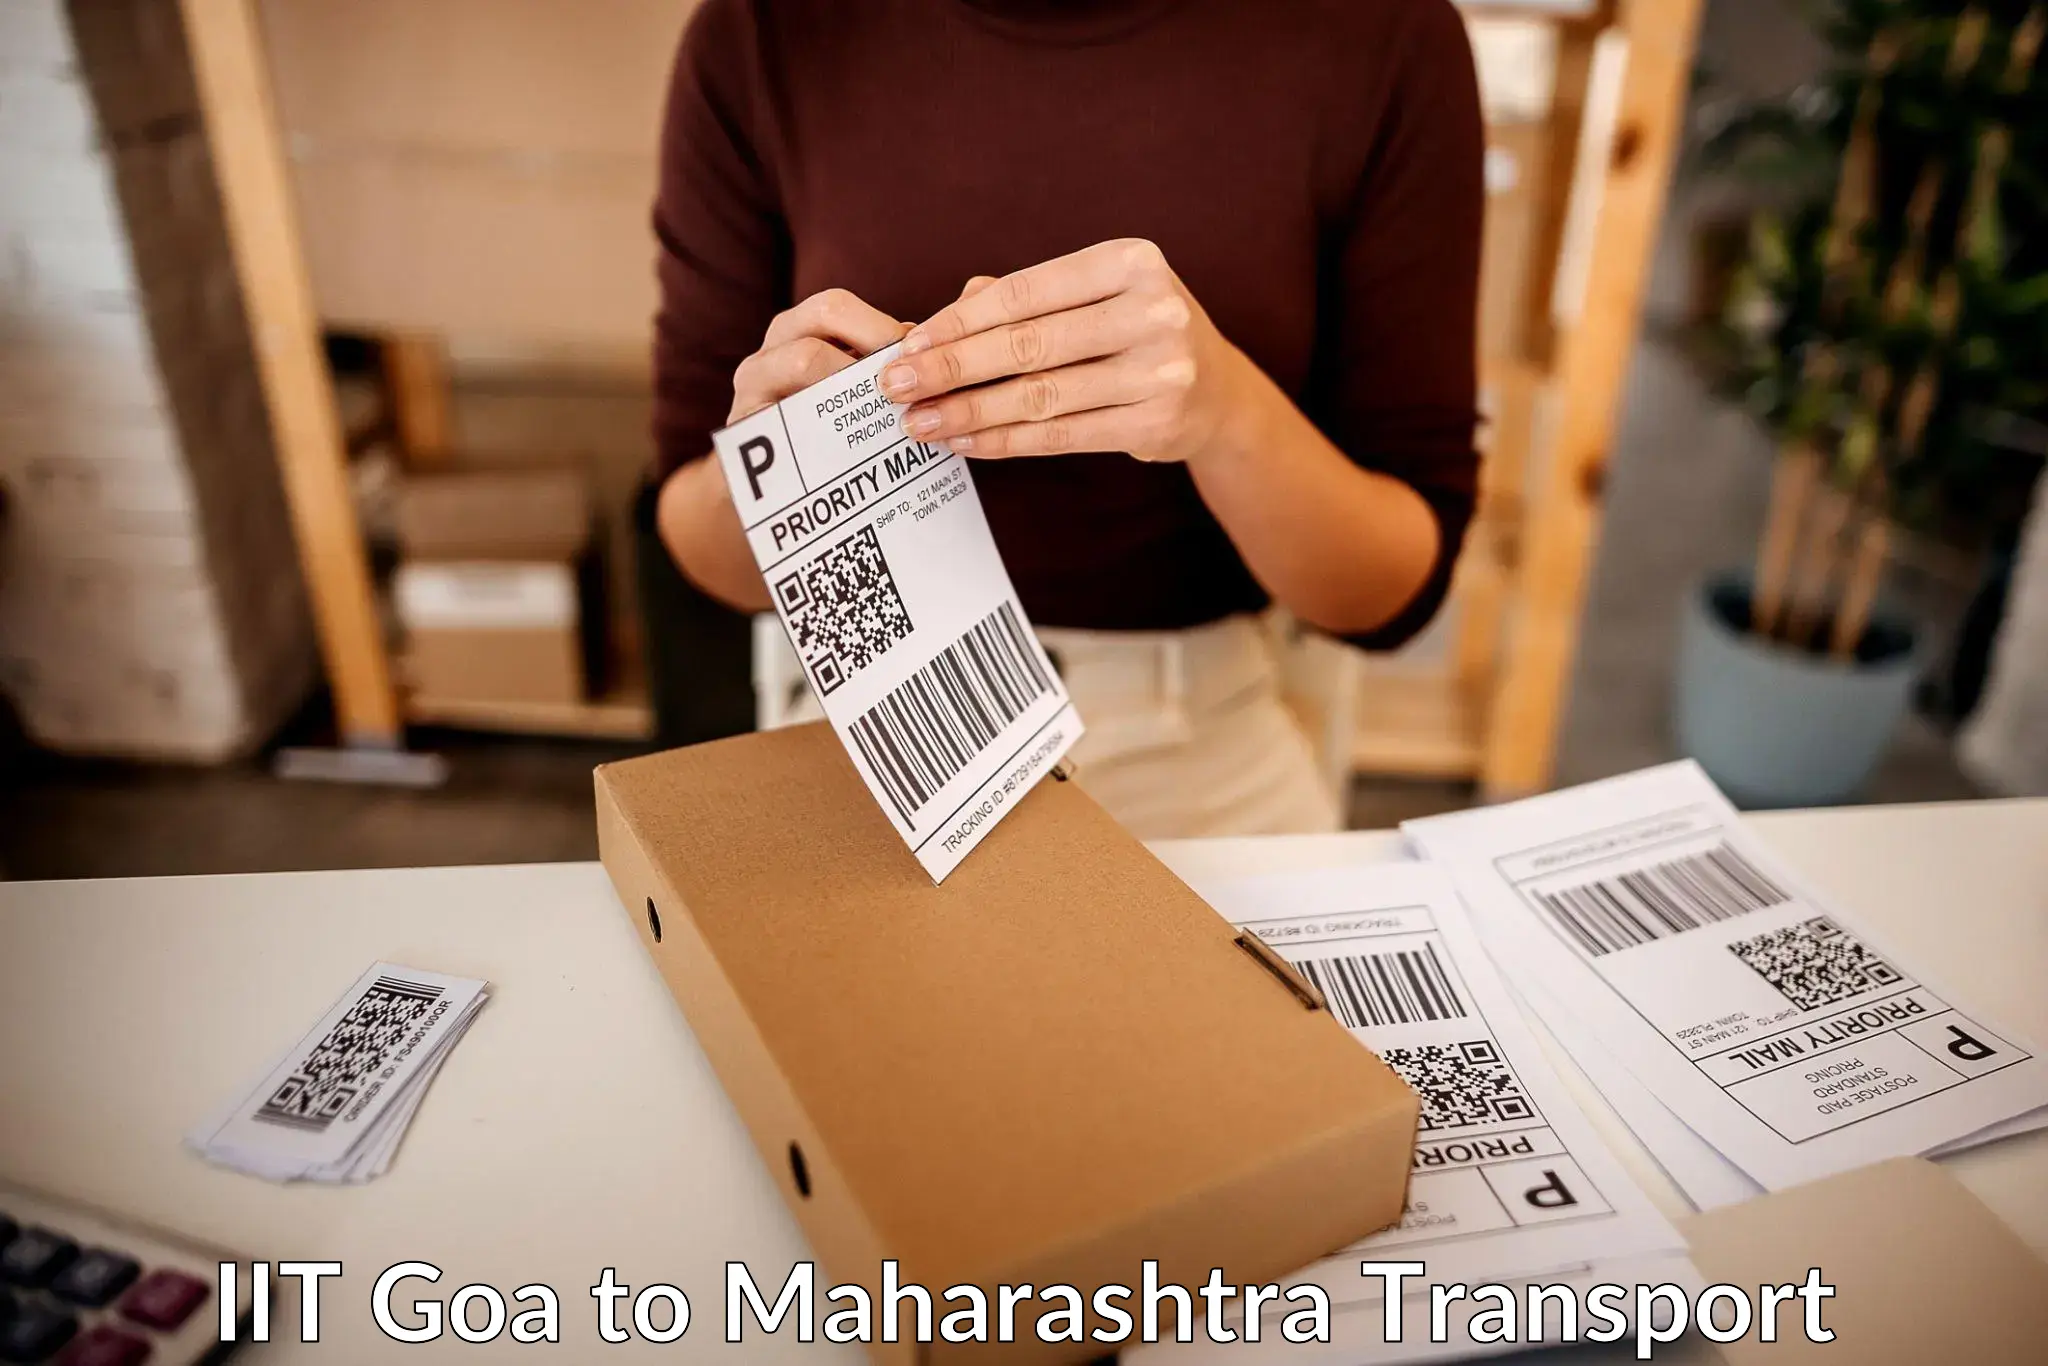 Express transport services IIT Goa to Pune